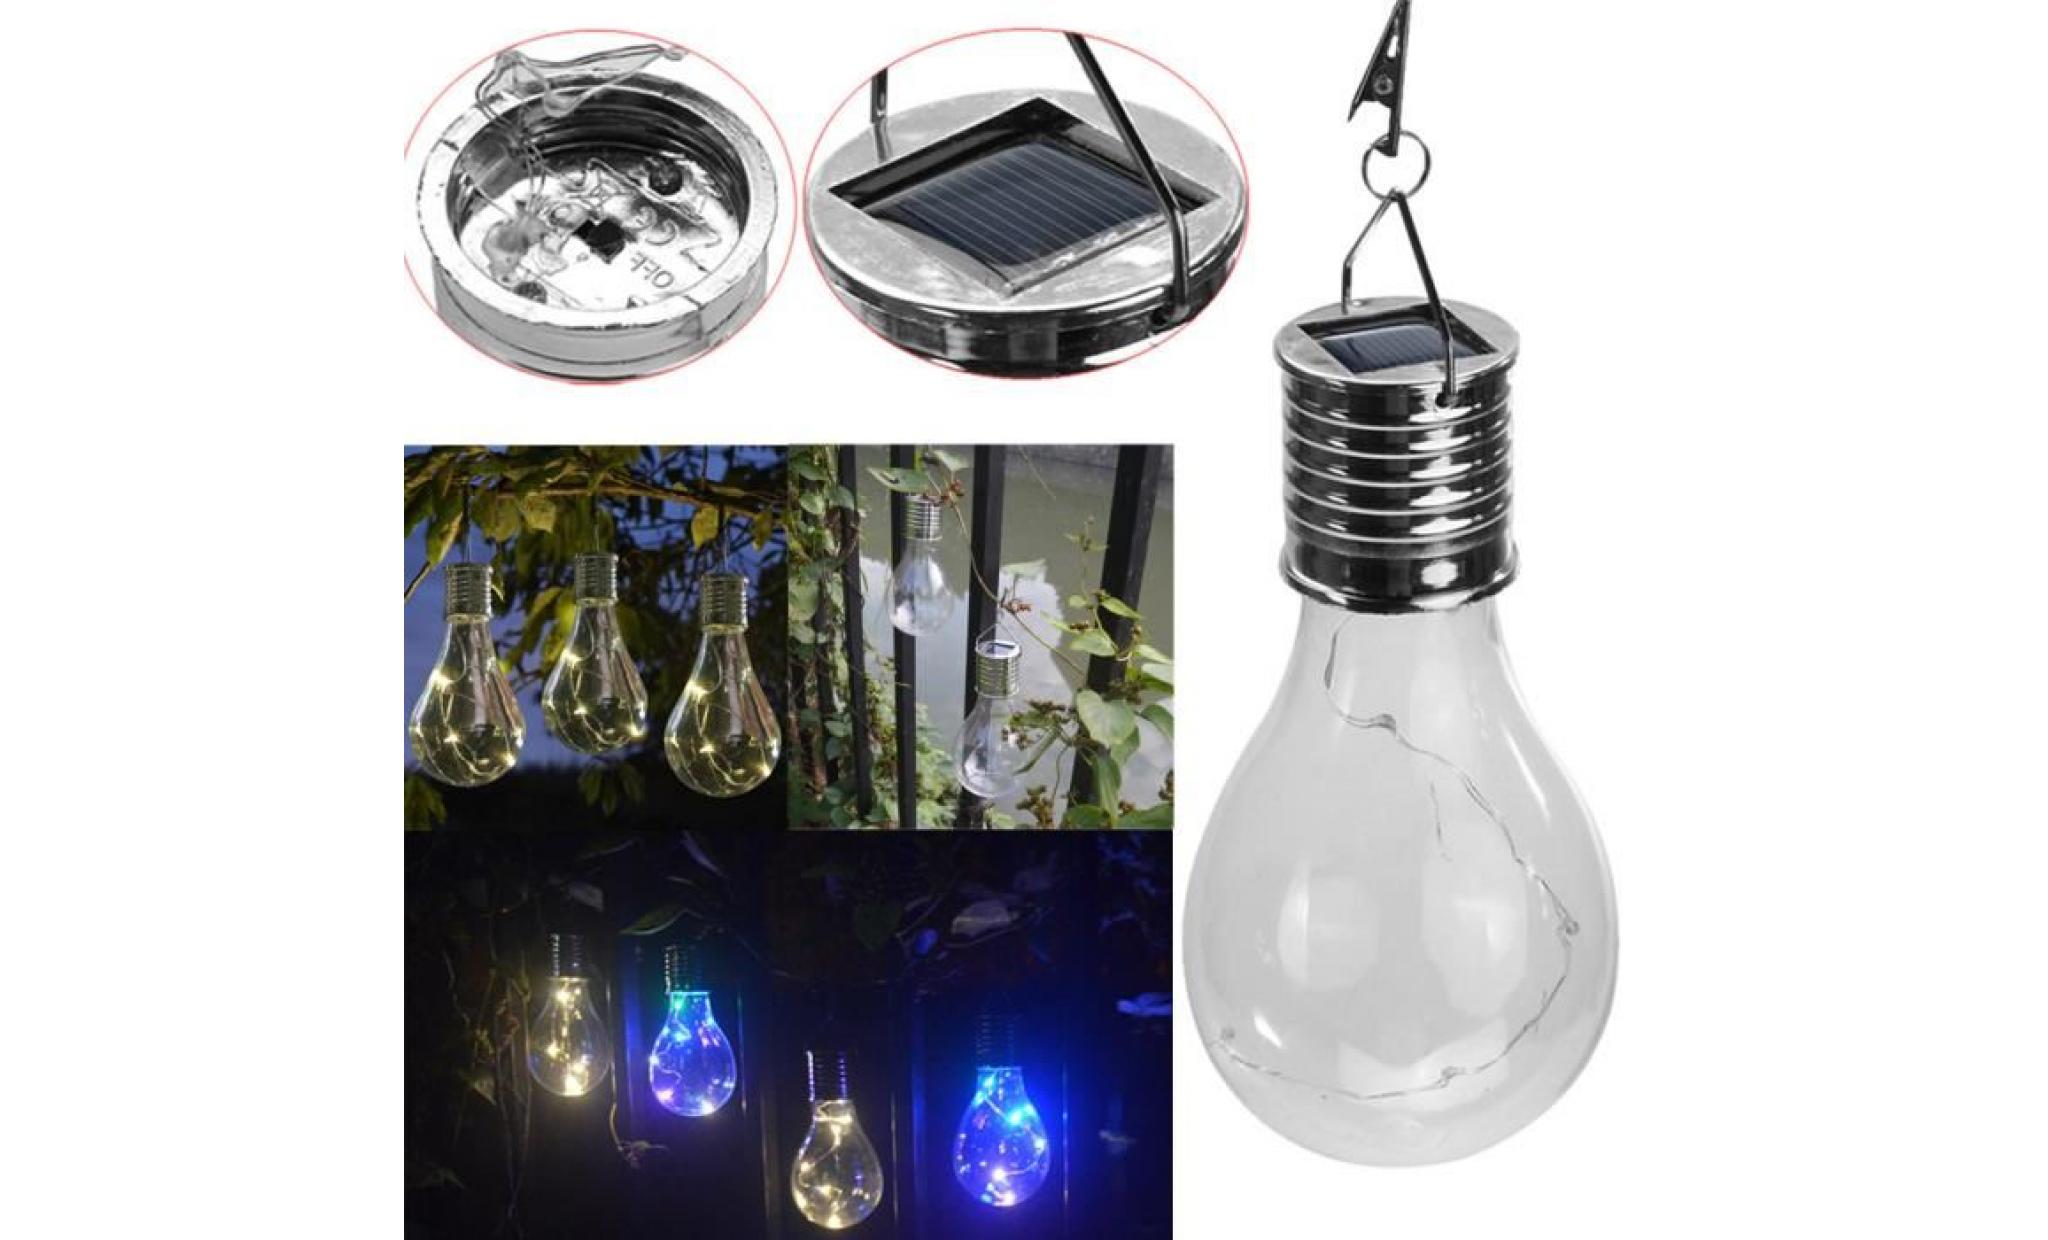 waterproof solar rotatable outdoor garden camping hanging led light lamp bulb sl pageare1674 pageare1674